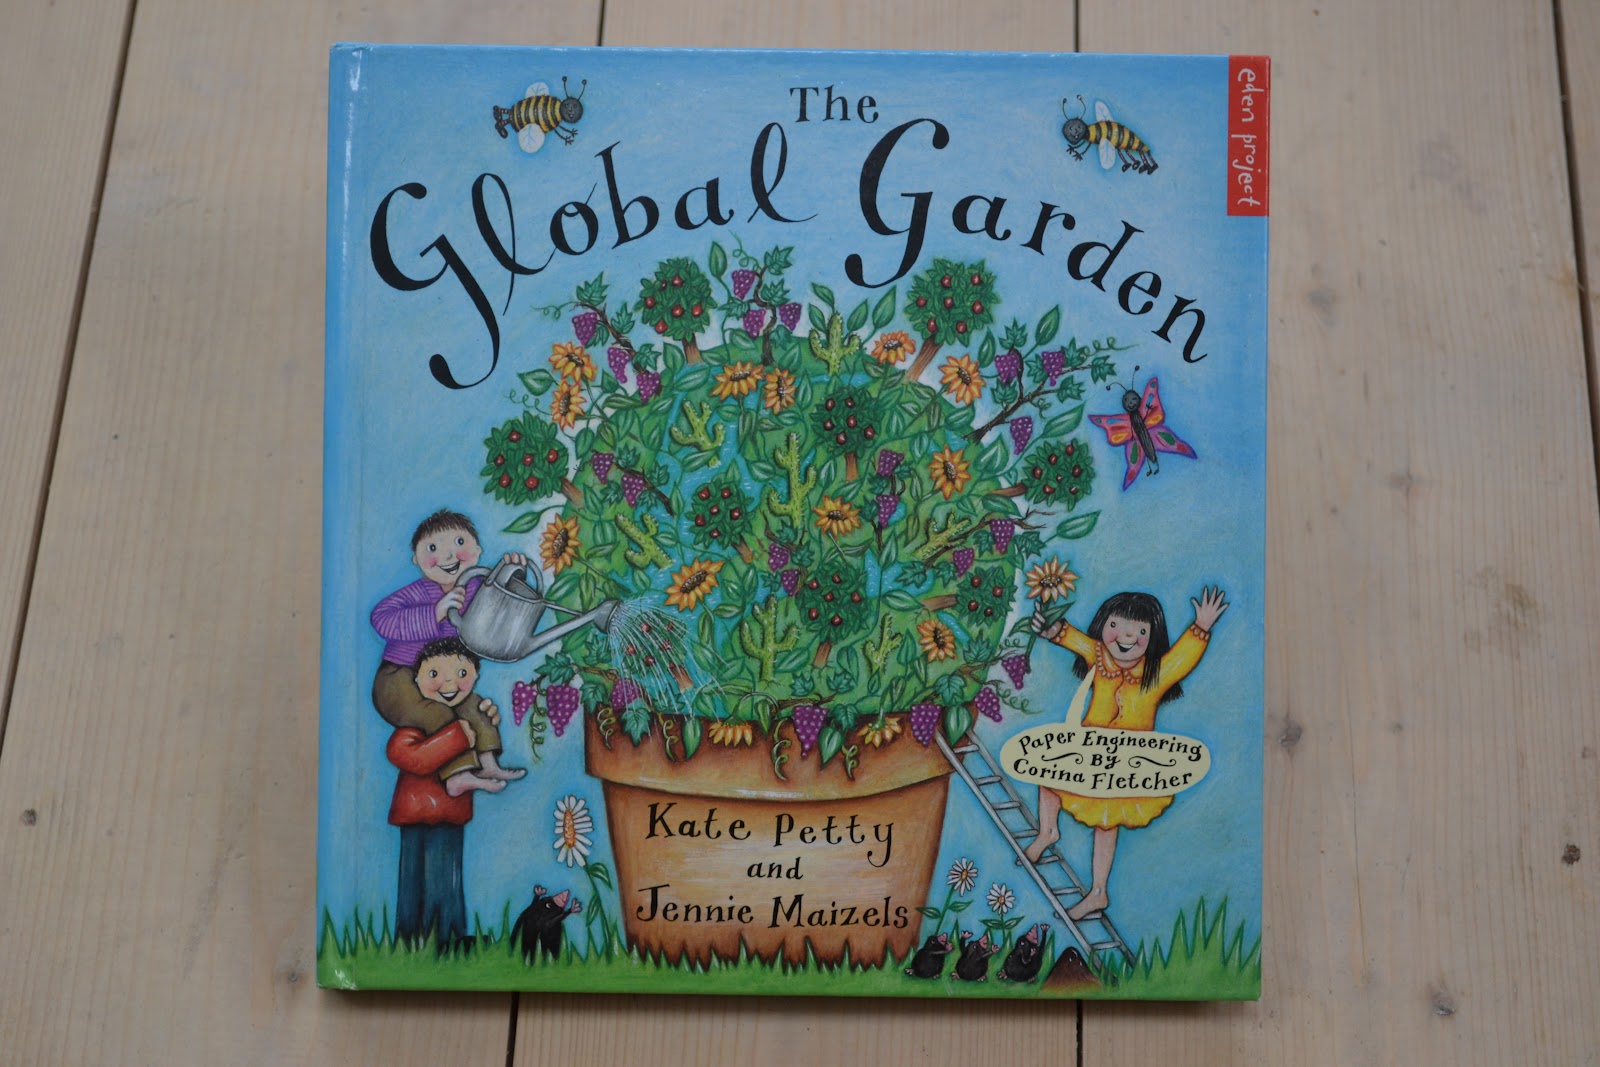 The Global Garden Kate Petty and Jennie Maizels